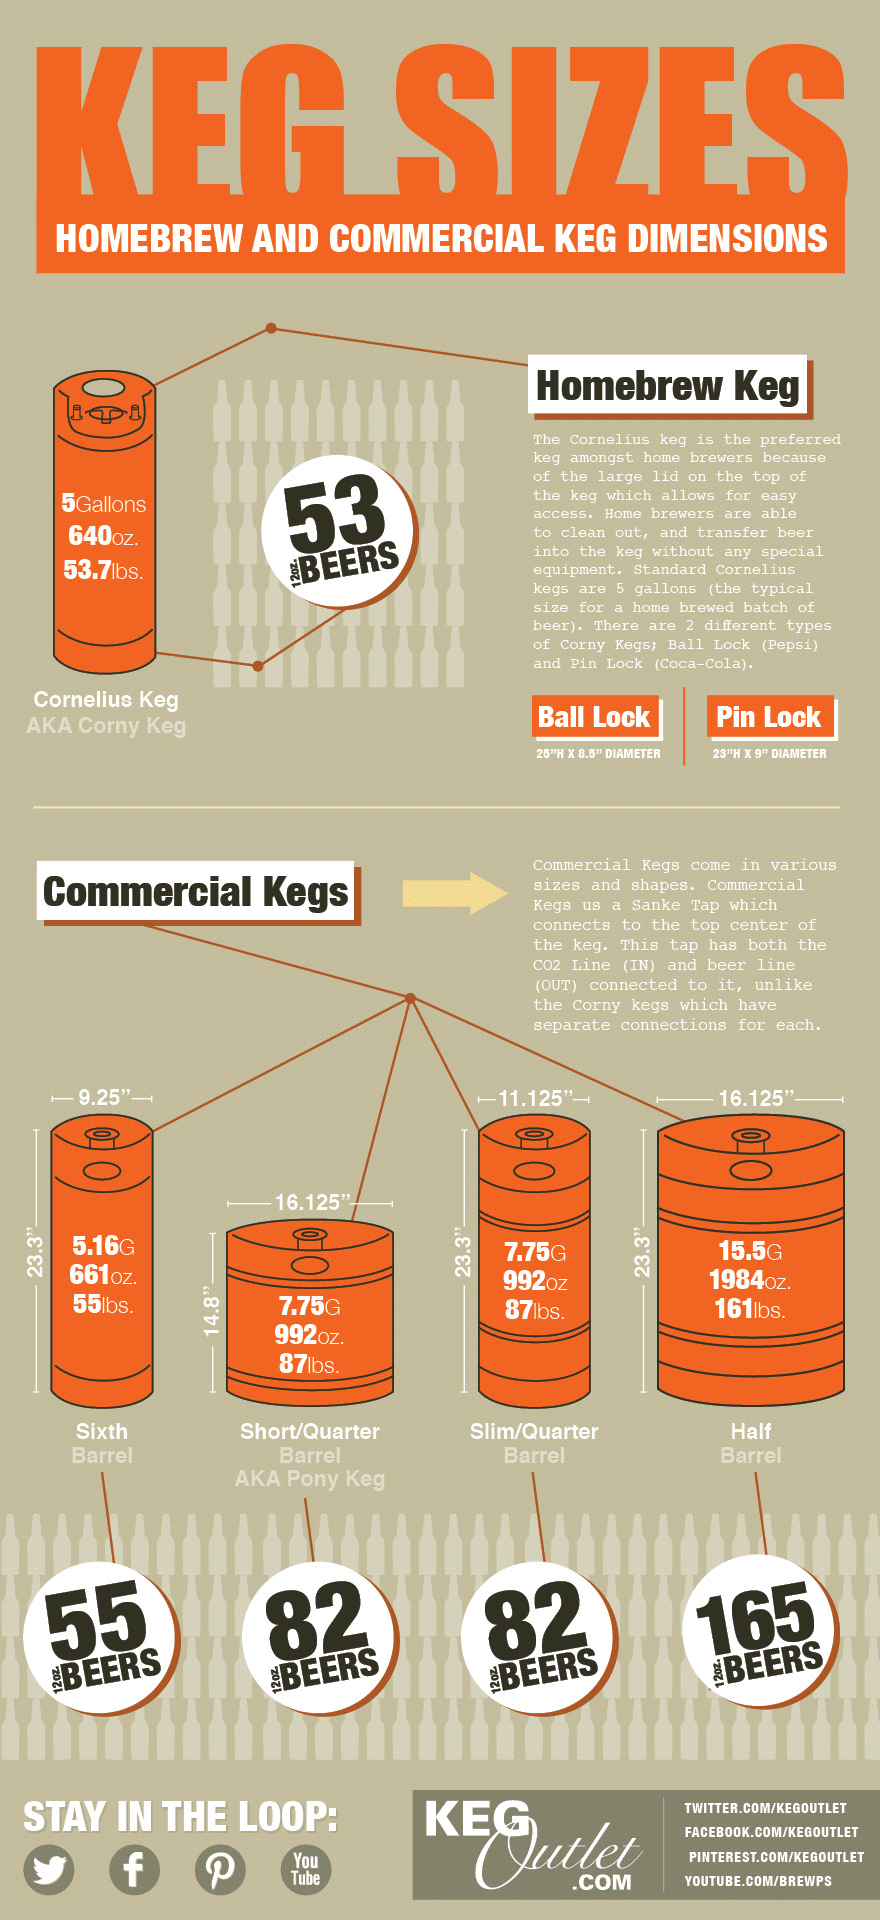 How much beer comes in a keg?